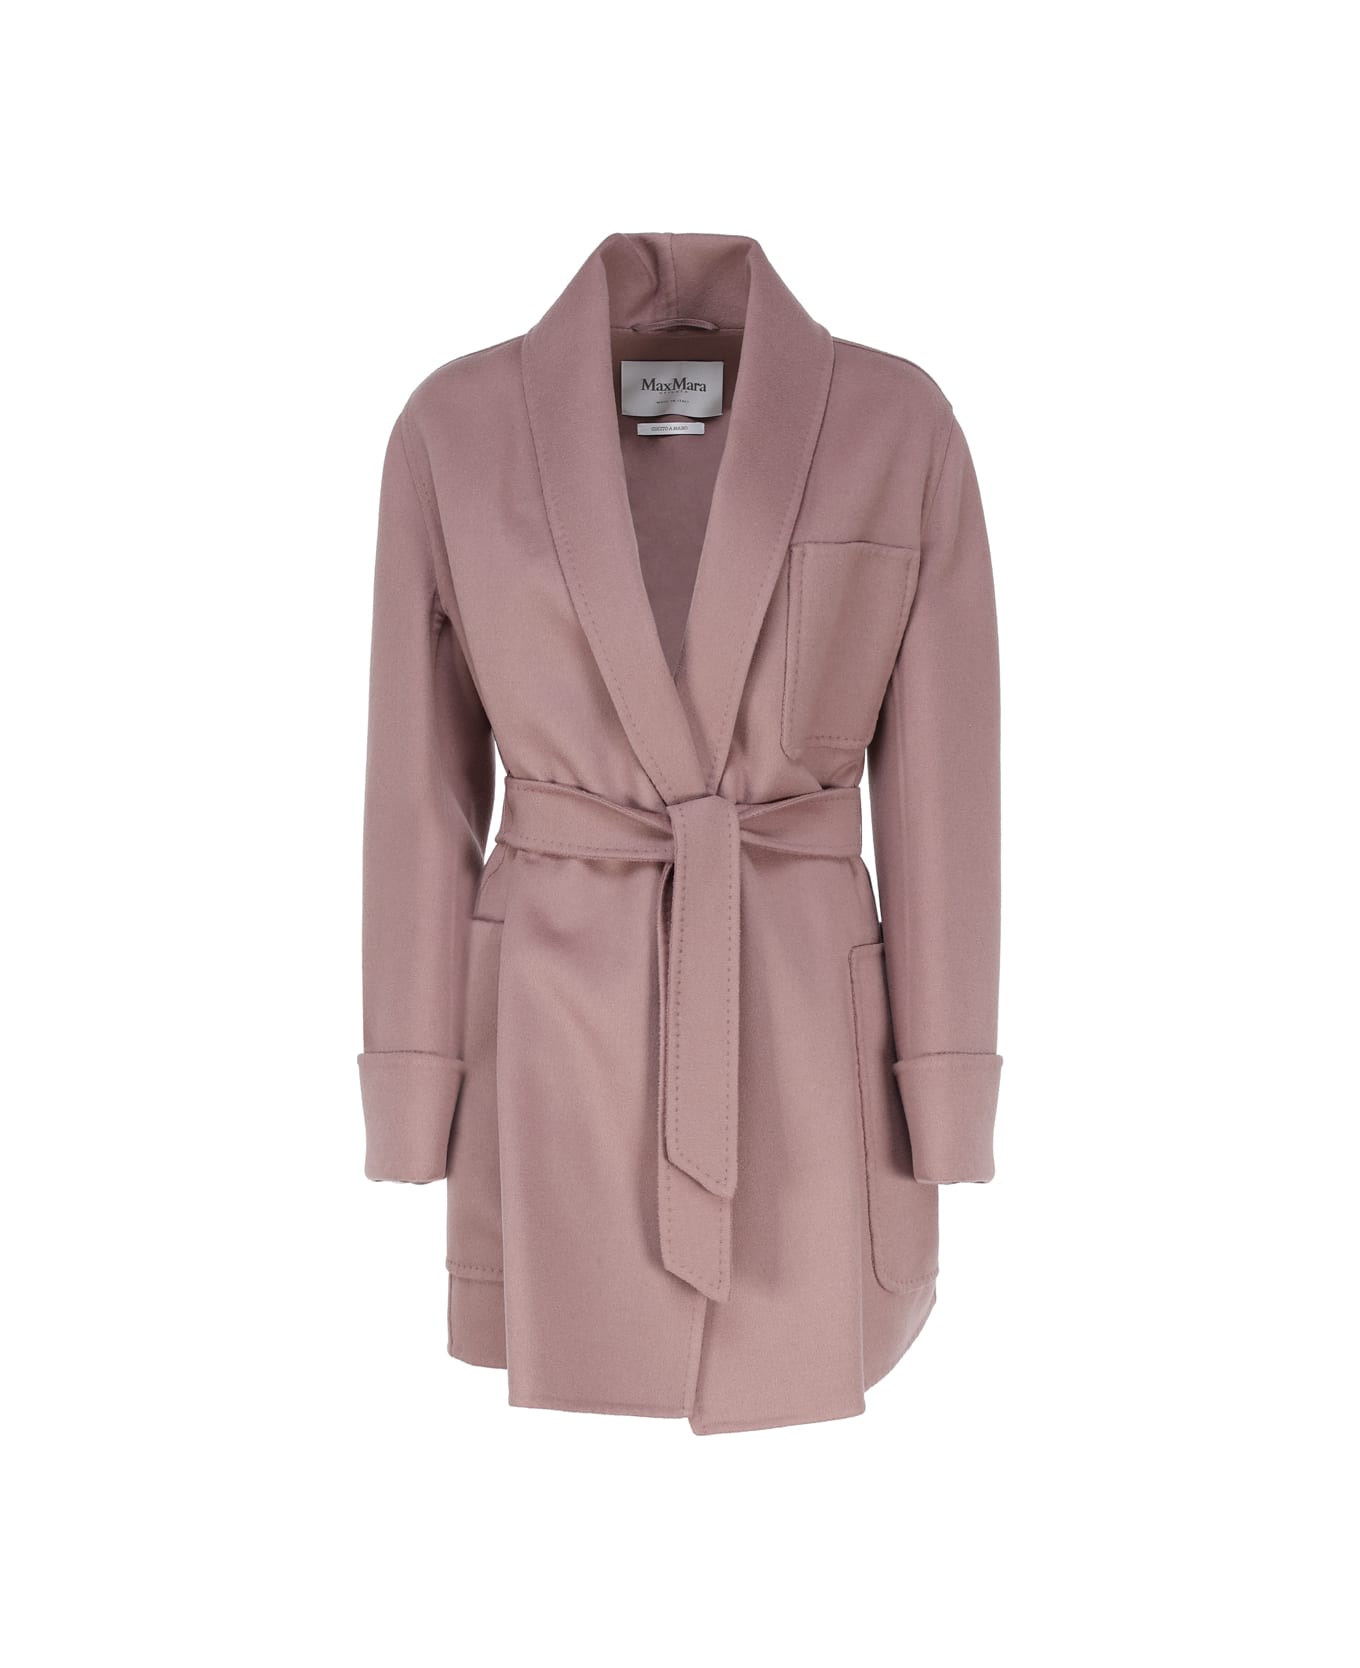 Max Mara Deconstructed Jacket In Wool And Cashmere - Pink